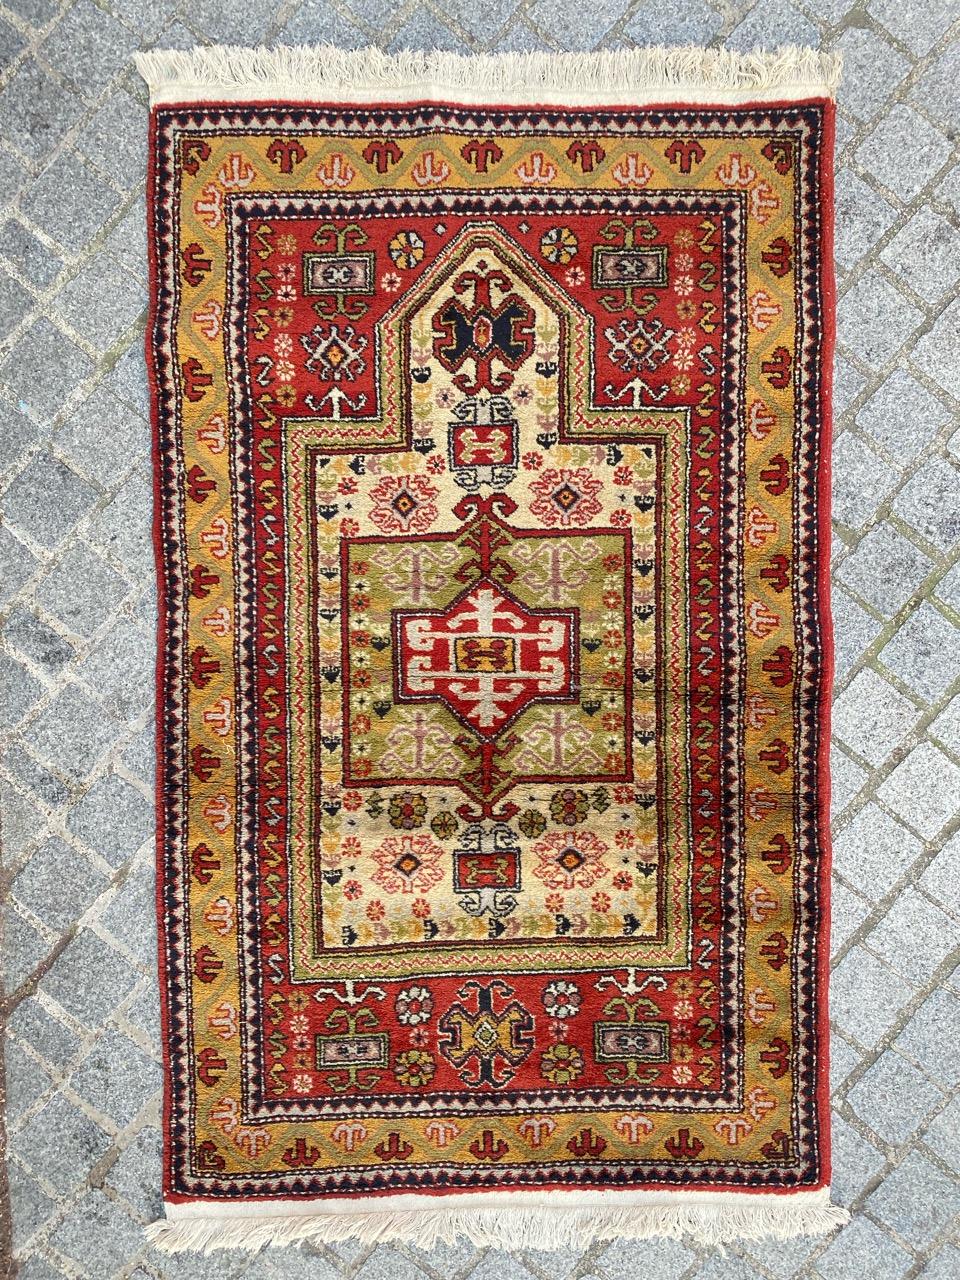 Nice mid century Azerbaïdjan rug with beautiful design of Kazak rugs and nice colors, entirely hand knotted with wool velvet on cotton foundation.

✨✨✨
